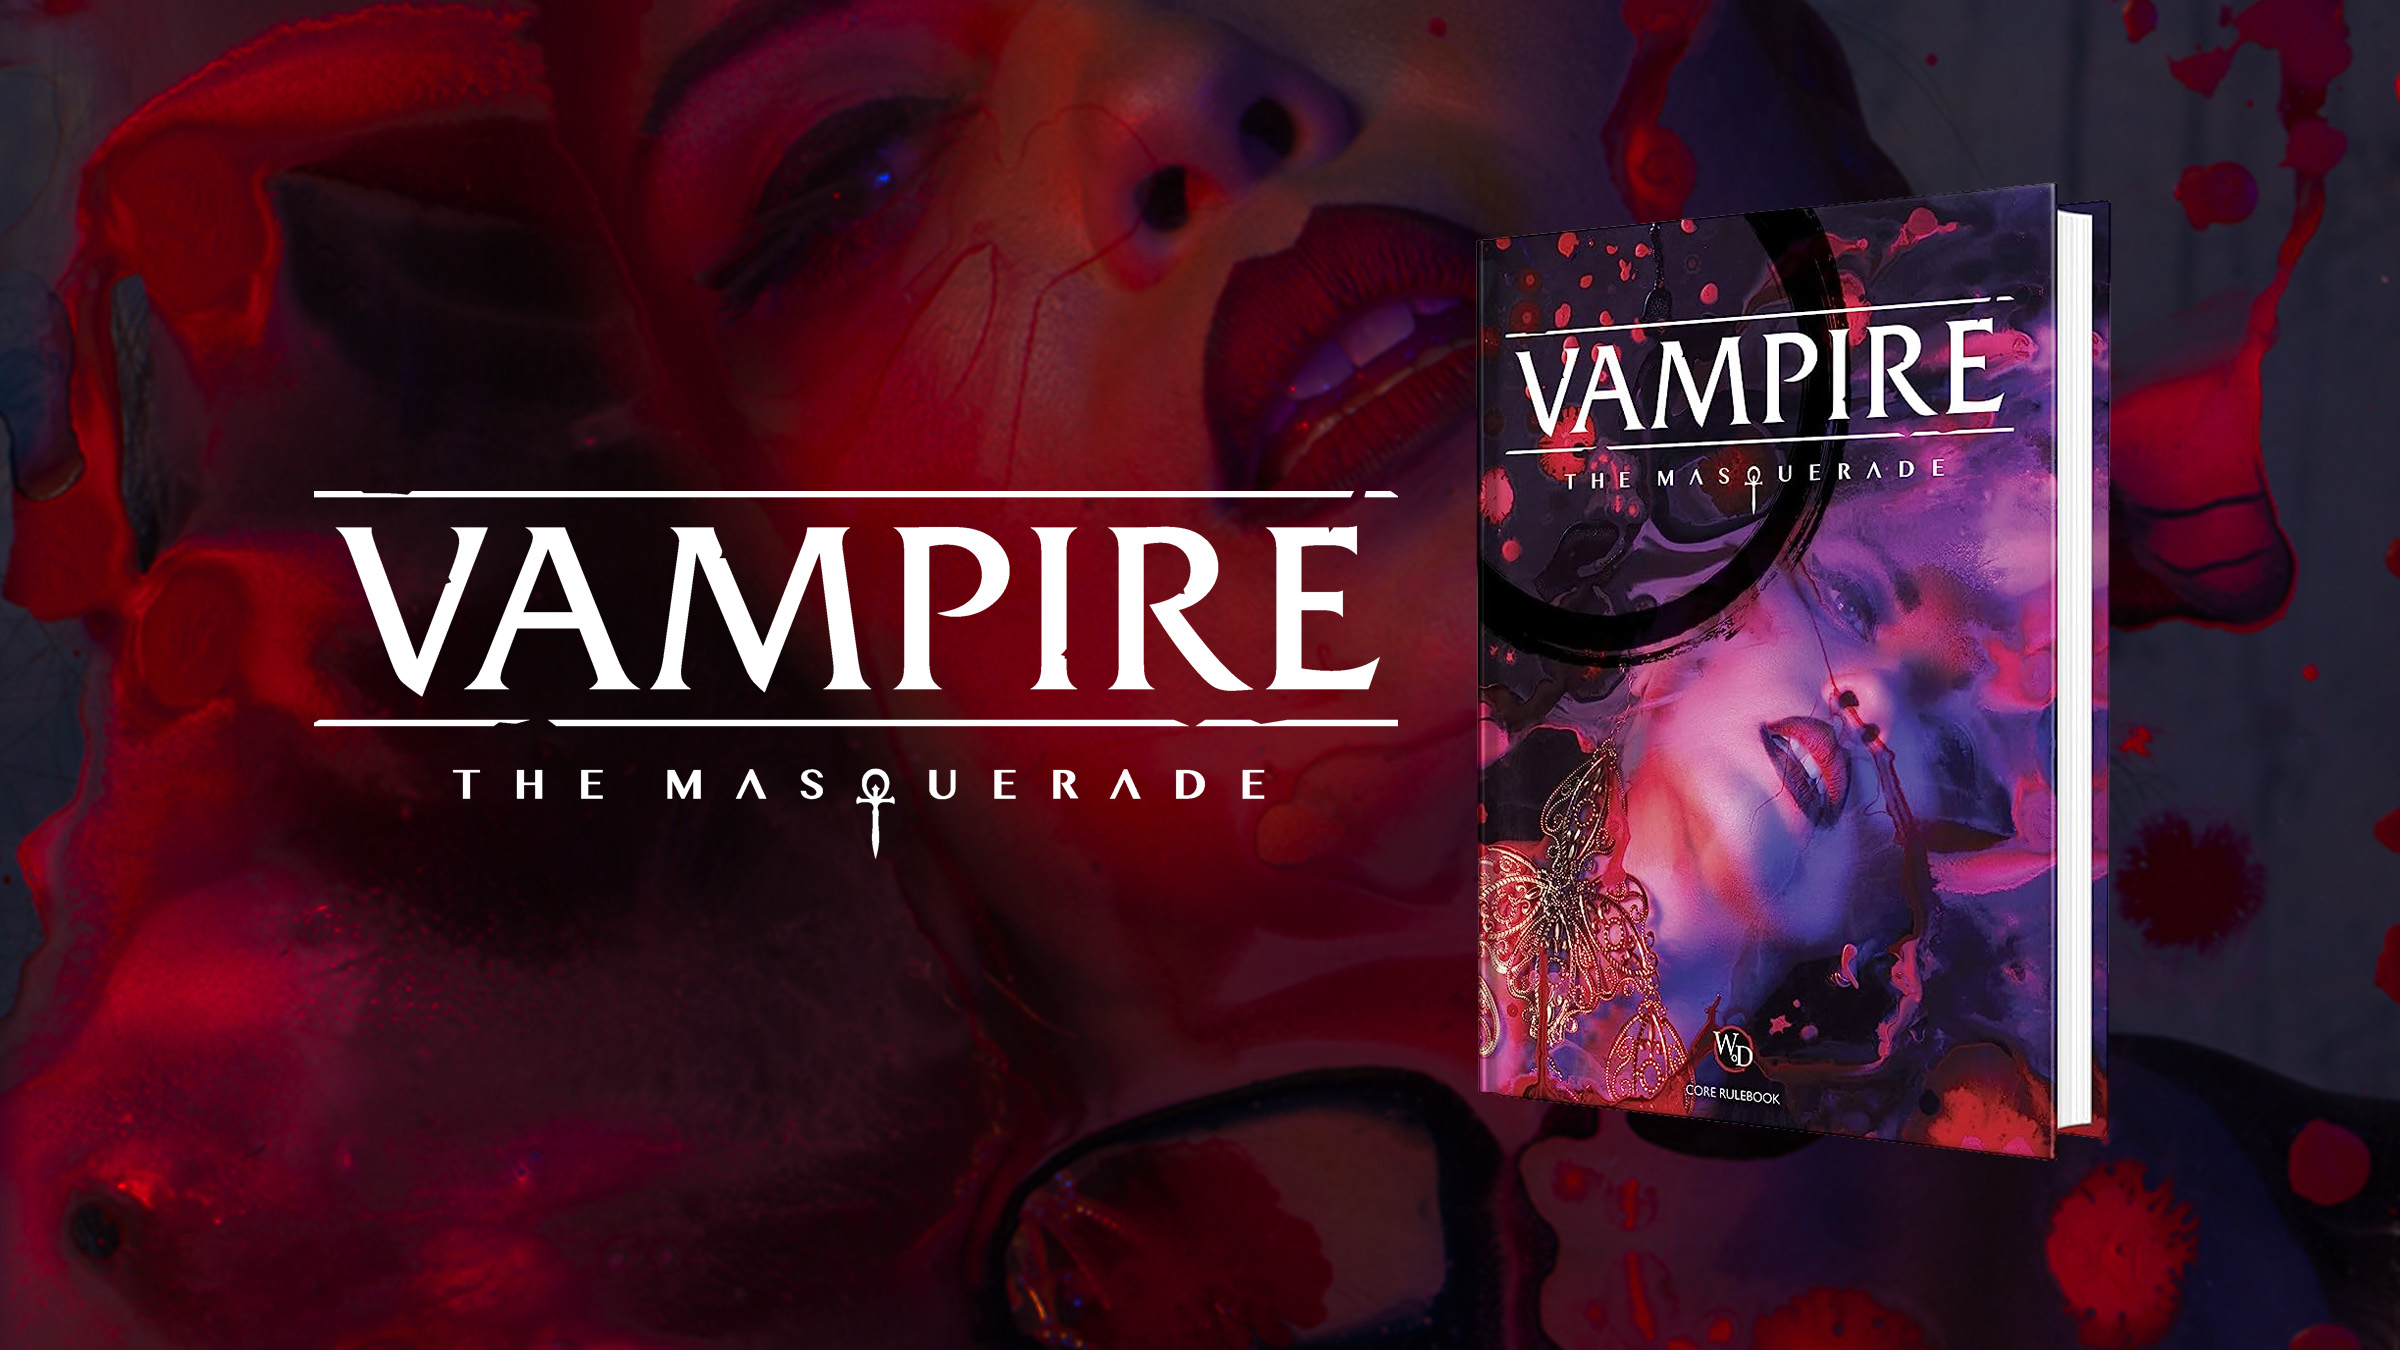 PDF Vampire: The Masquerade Roleplaying Game 5th Edition Players Guide